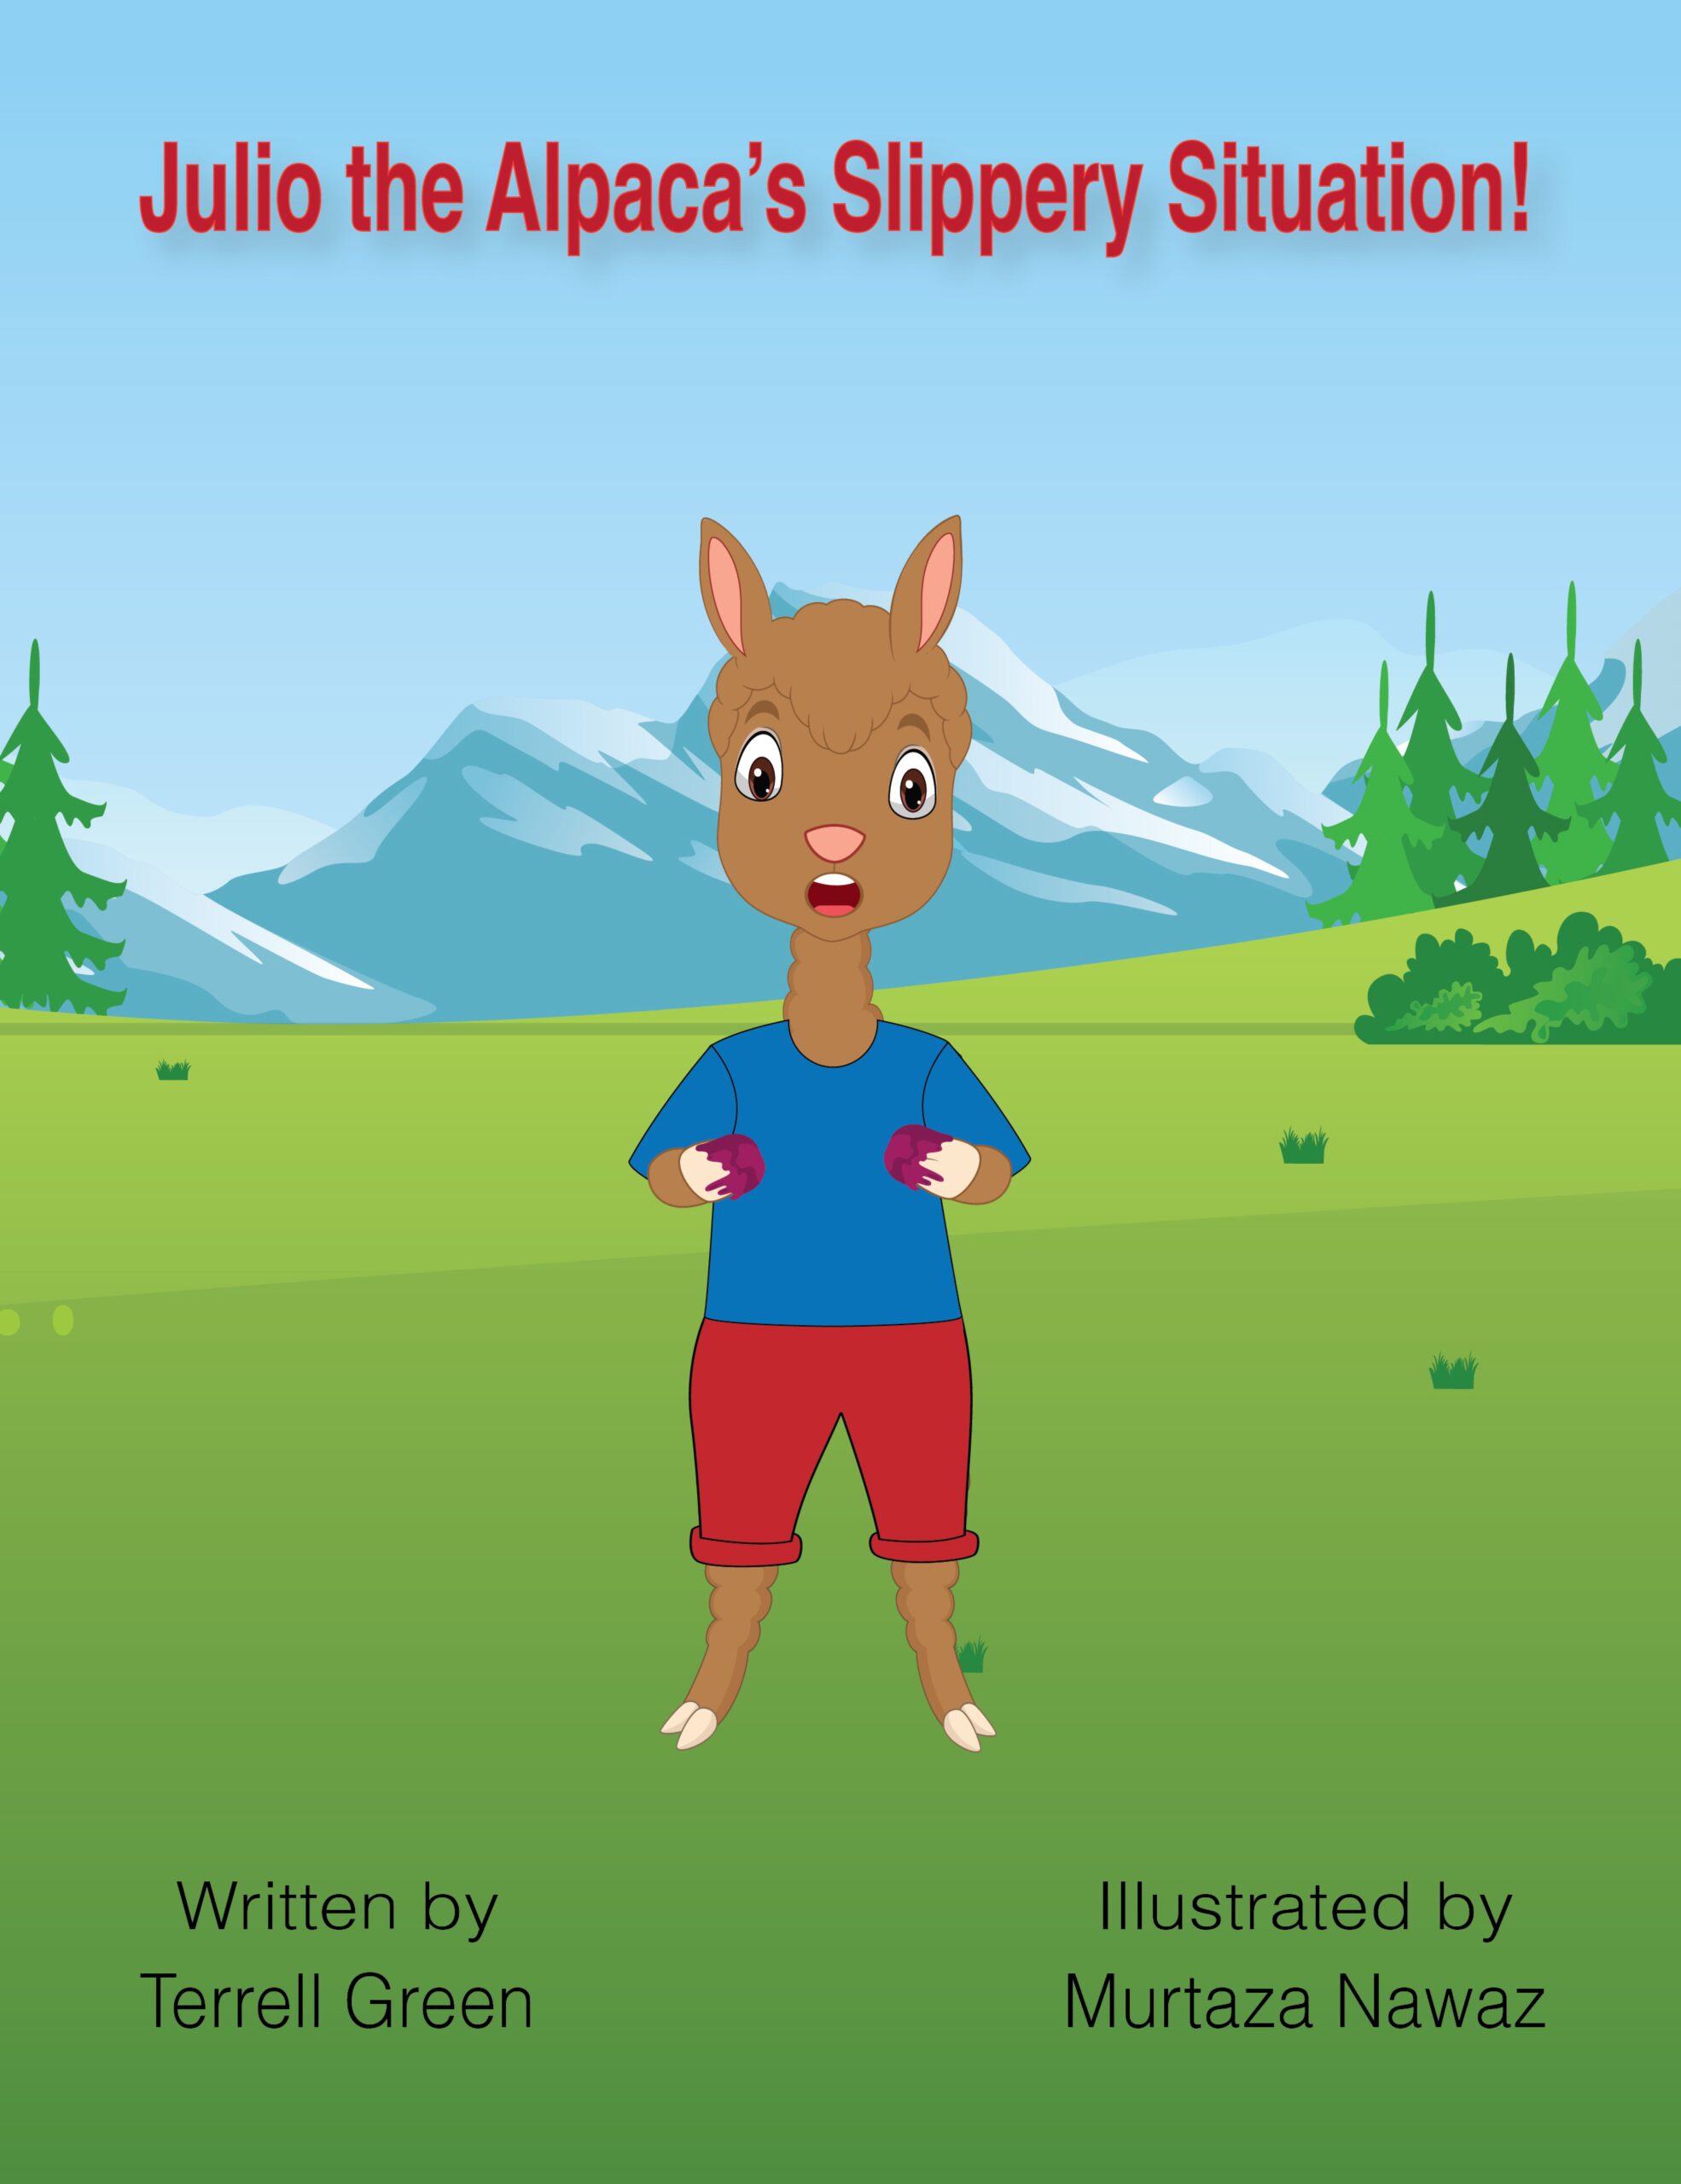 FREE: Julio the Alpaca’s Slippery Situation! by Terrell Green